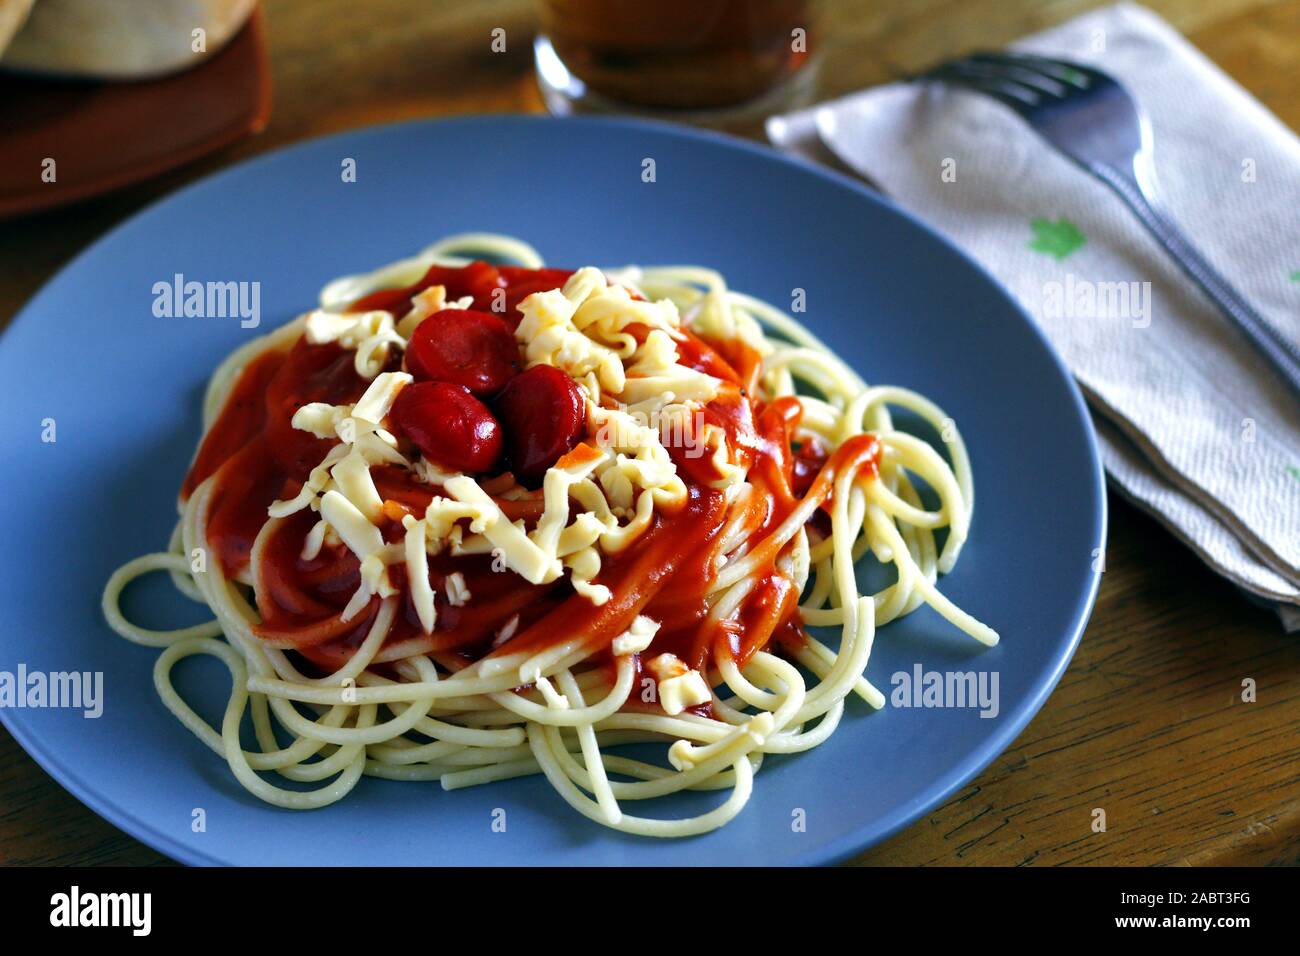 Photo Of Freshly Cooked Spaghetti Pasta With Tomato Sauce Topped With Cheese And Hotdog Stock Photo Alamy